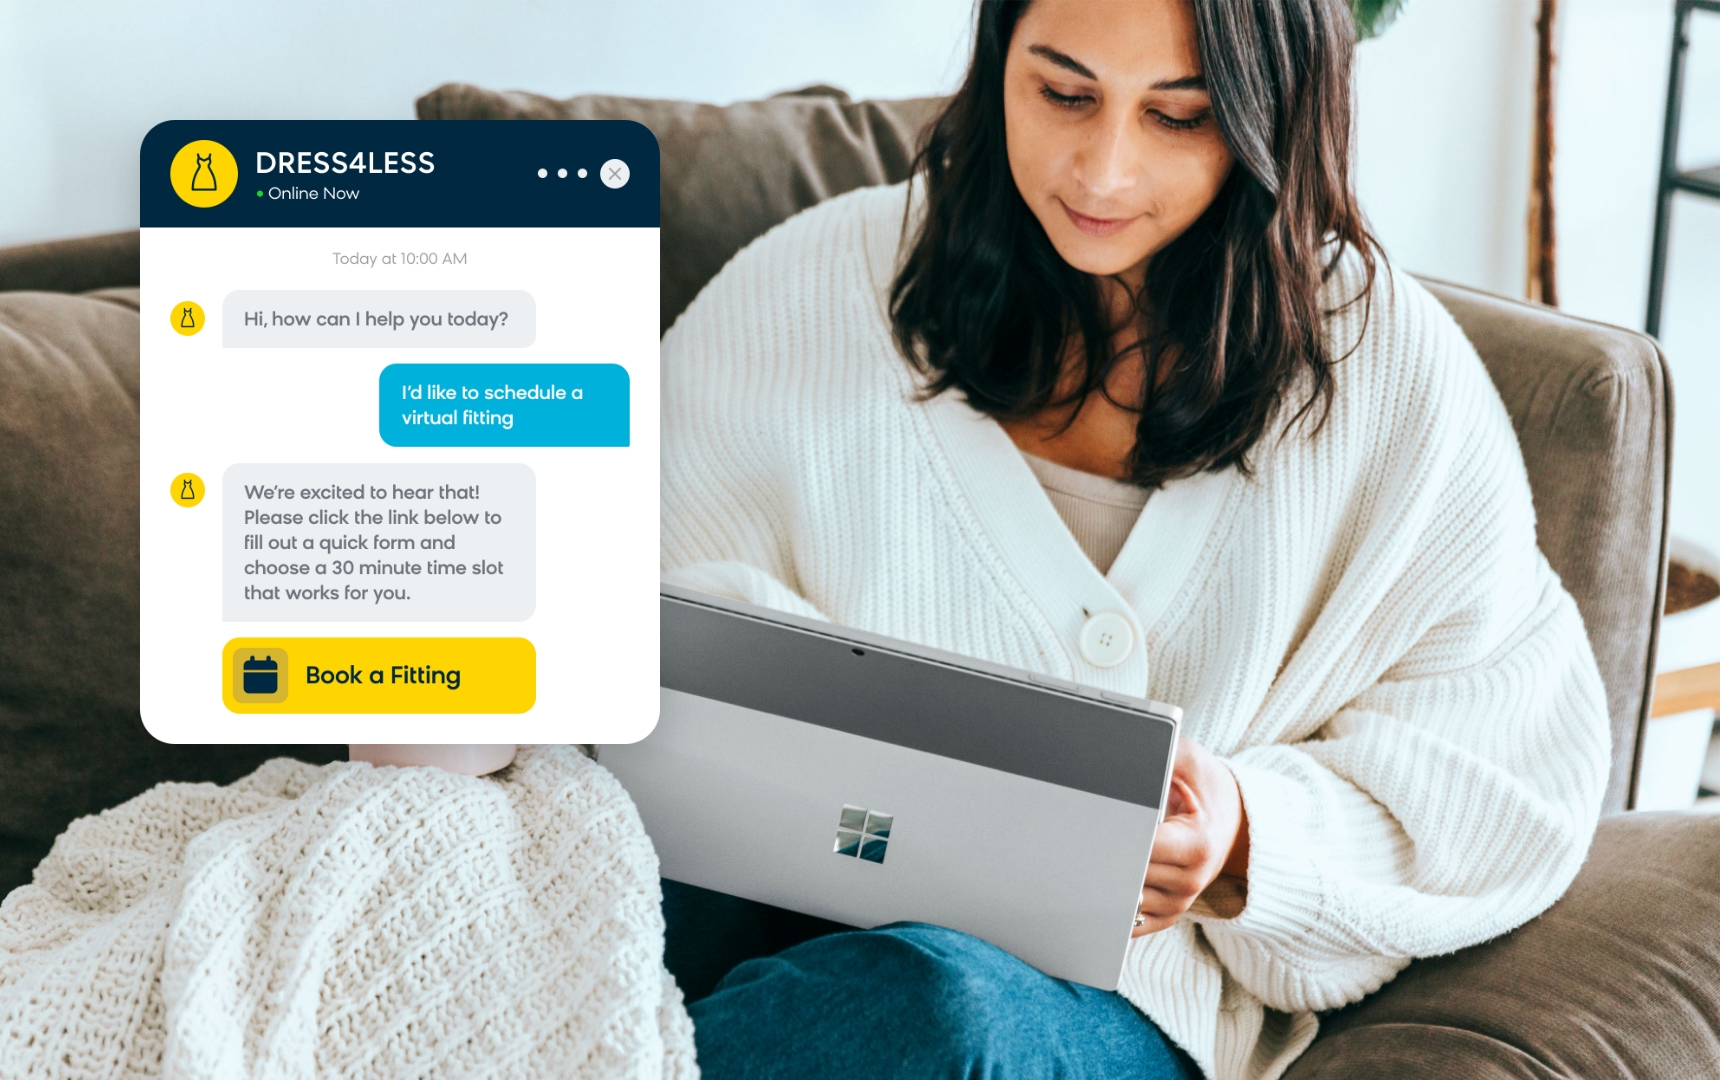 AI chatbots can mimic customer service agents, allowing fashion retail companies to respond to customer queries instantly.